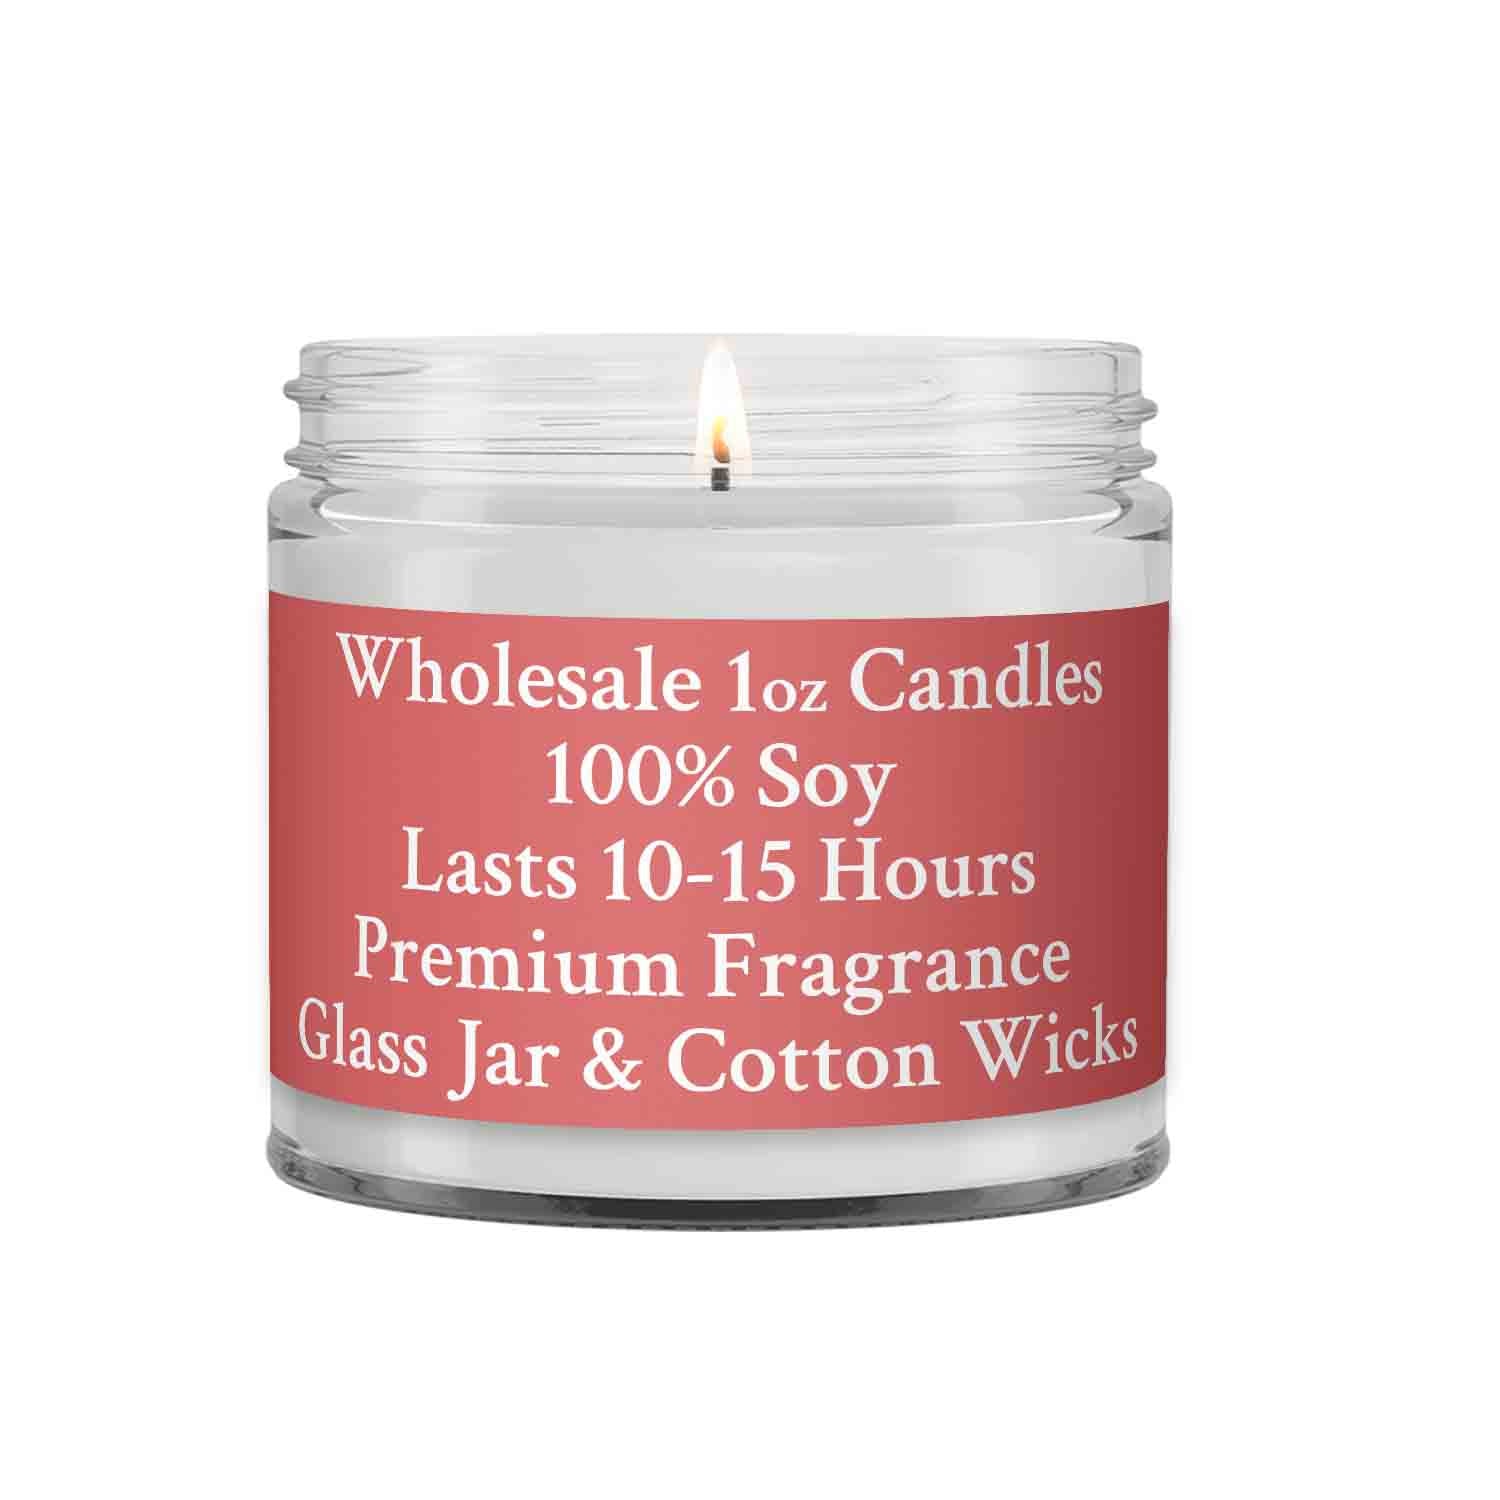 Scented Soy Candles in Bulk: Buy Soy Wax Candles Wholesale